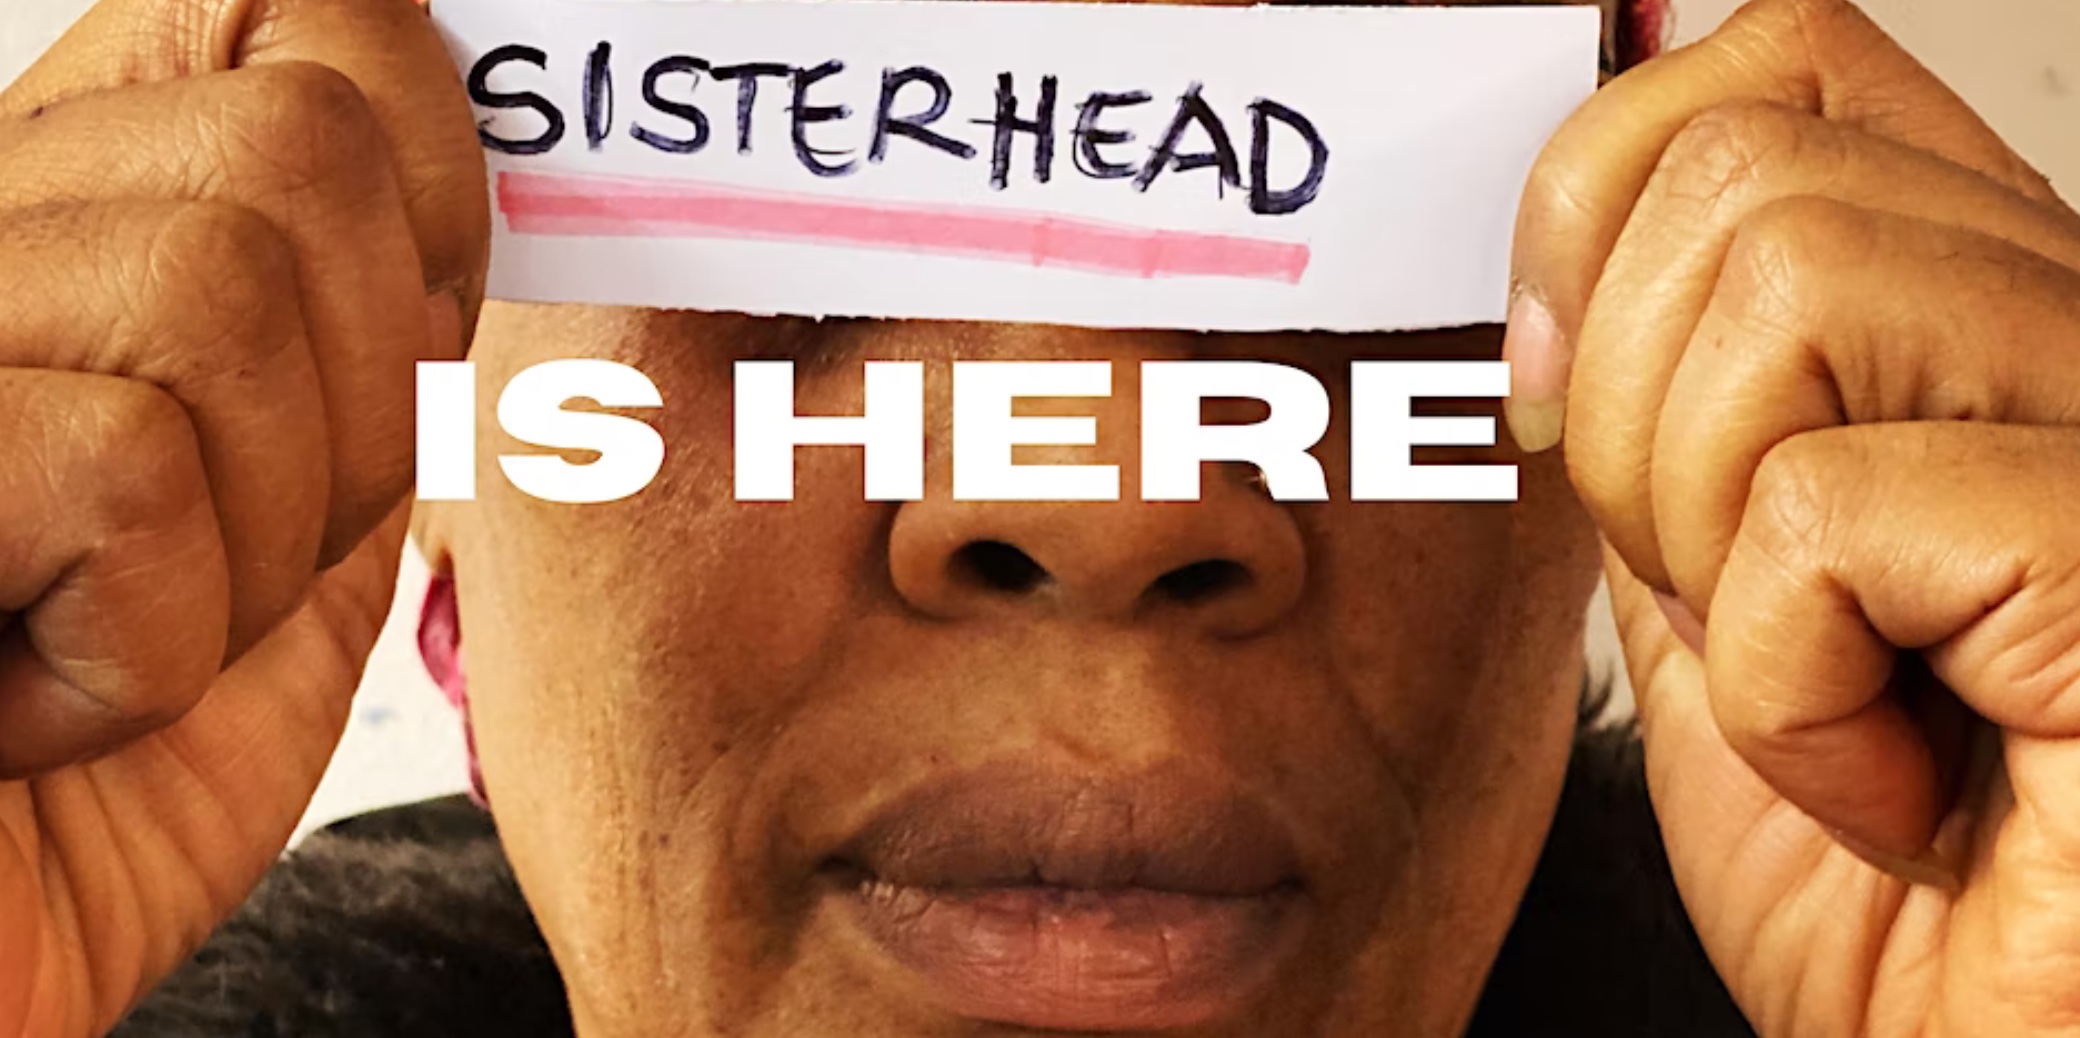 Sisterhead is here, 16 days of activism play